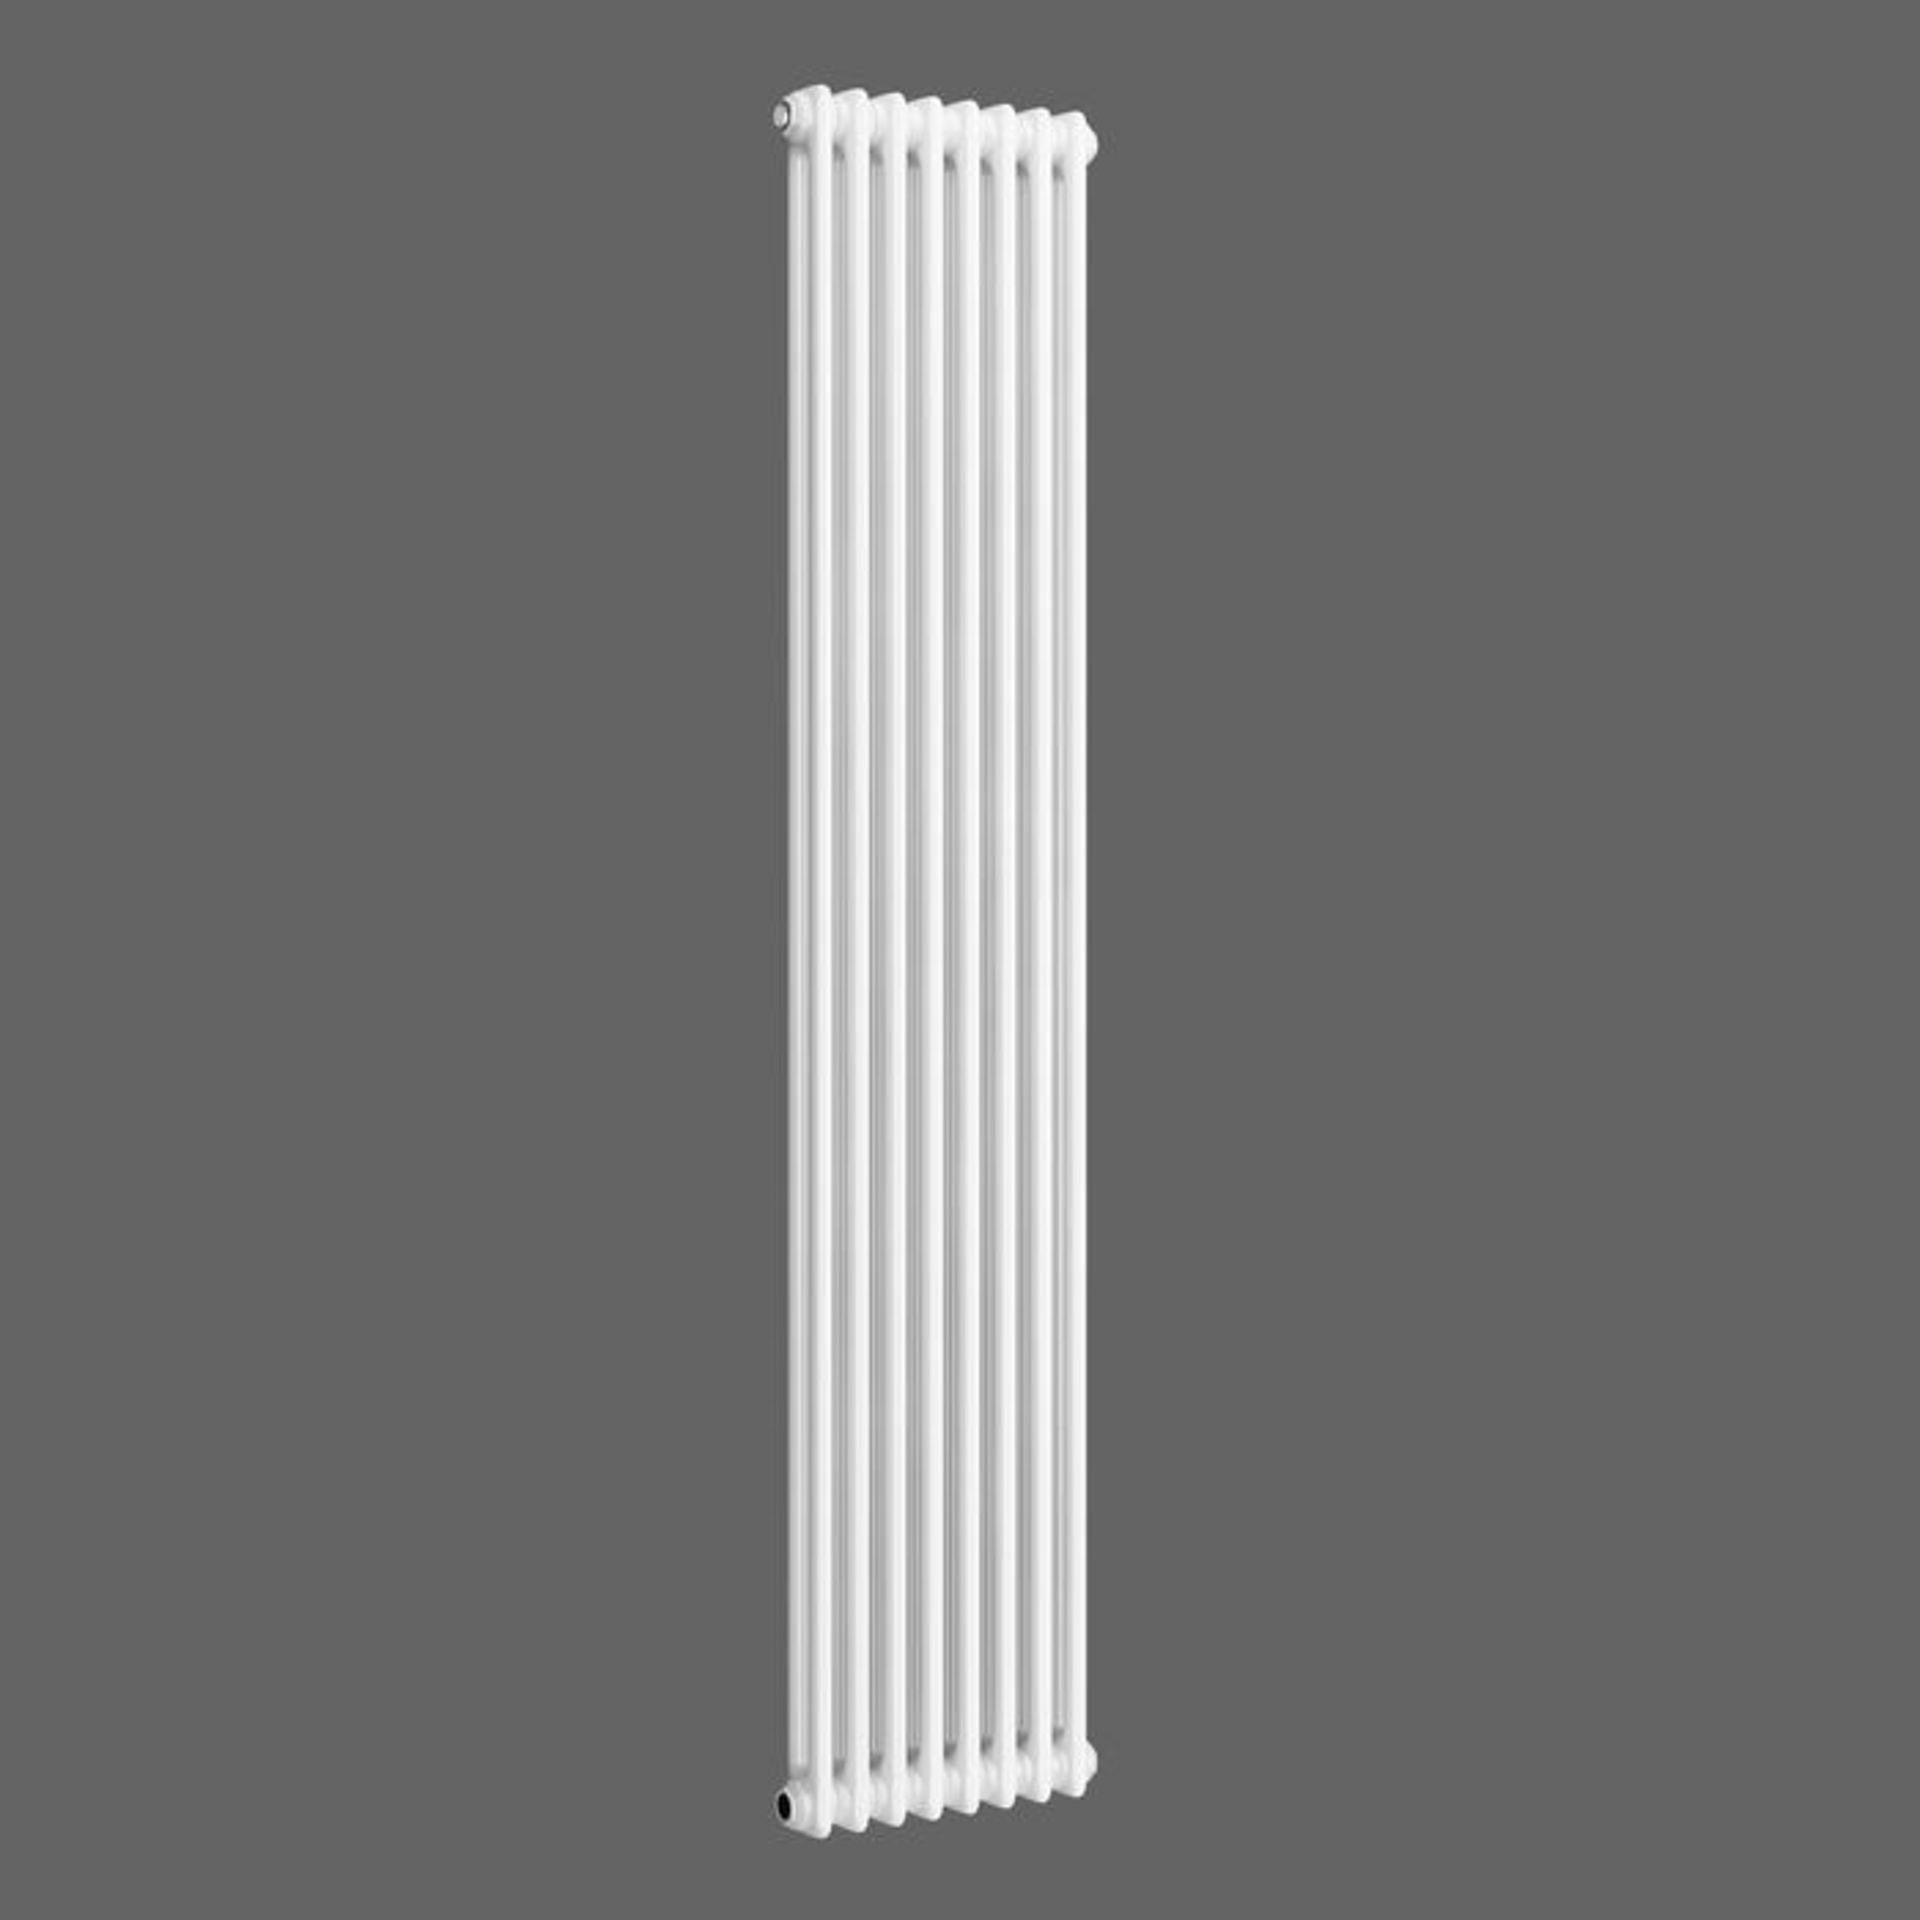 (QW73) 2000x306mm White Double Panel Vertical Colosseum Traditional Radiator. RRP £408.99. - Image 7 of 8